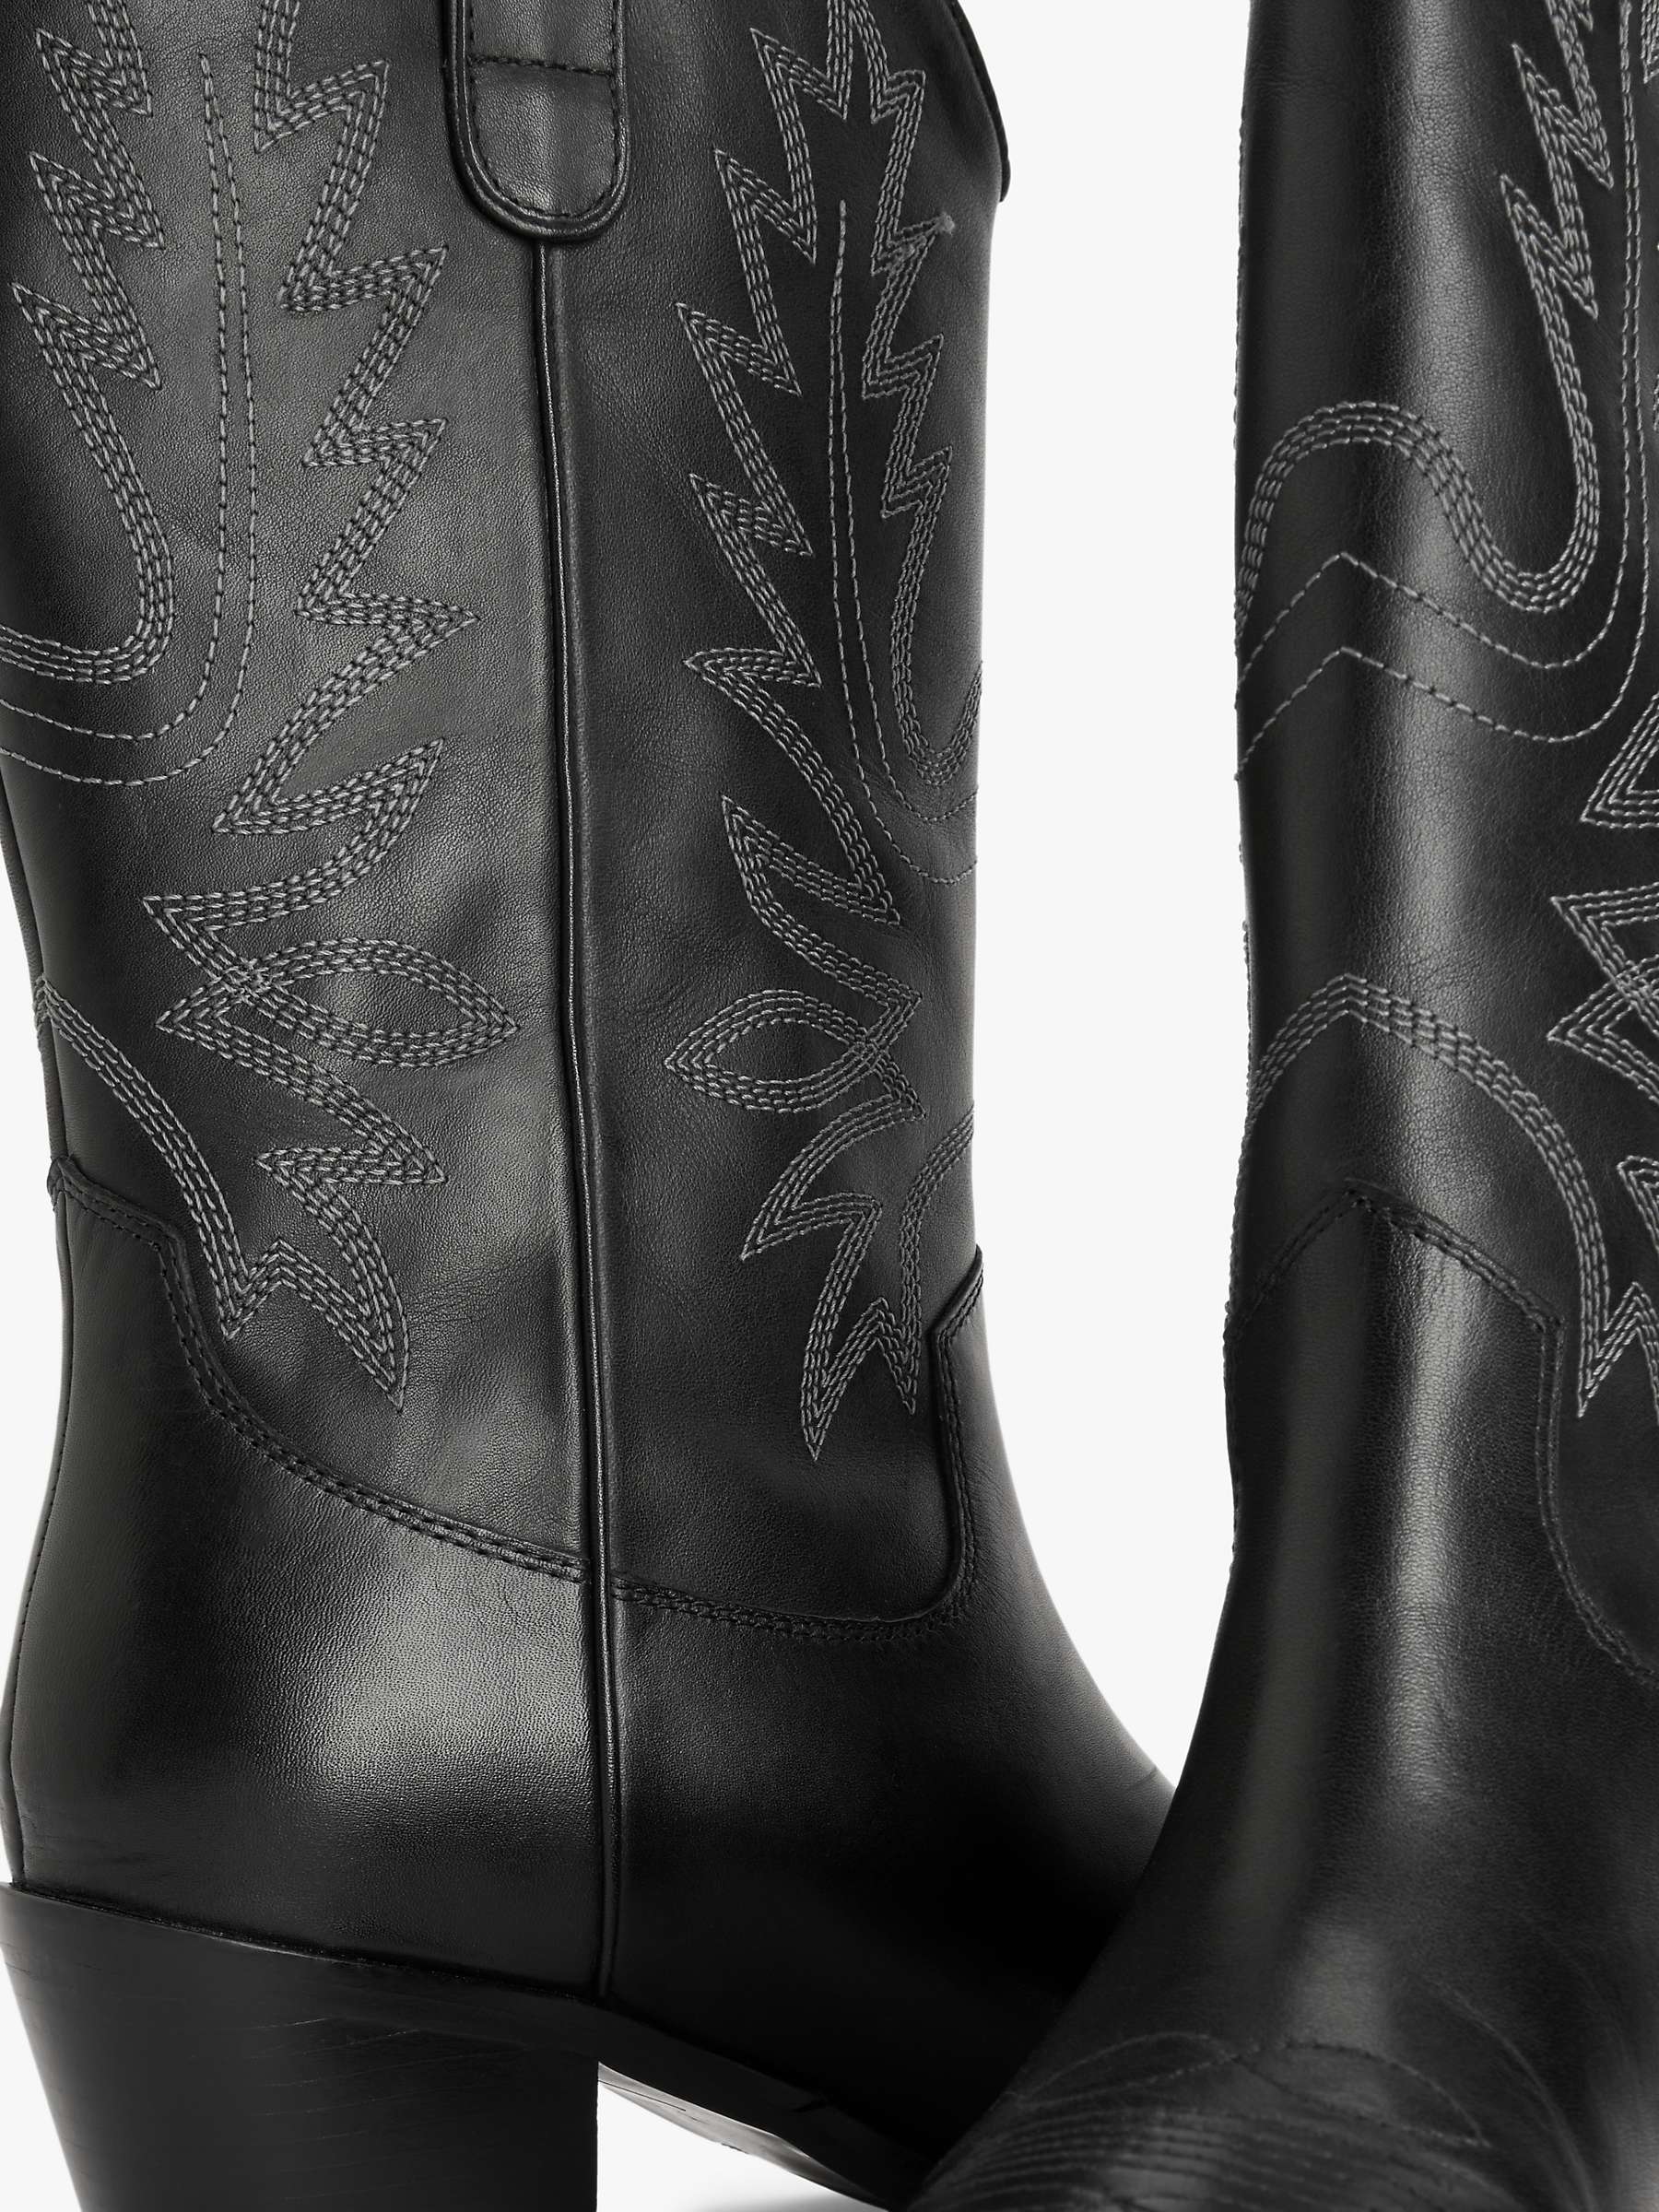 Buy AND/OR Thorn Leather Embroidered Long Western Boots, Black Online at johnlewis.com